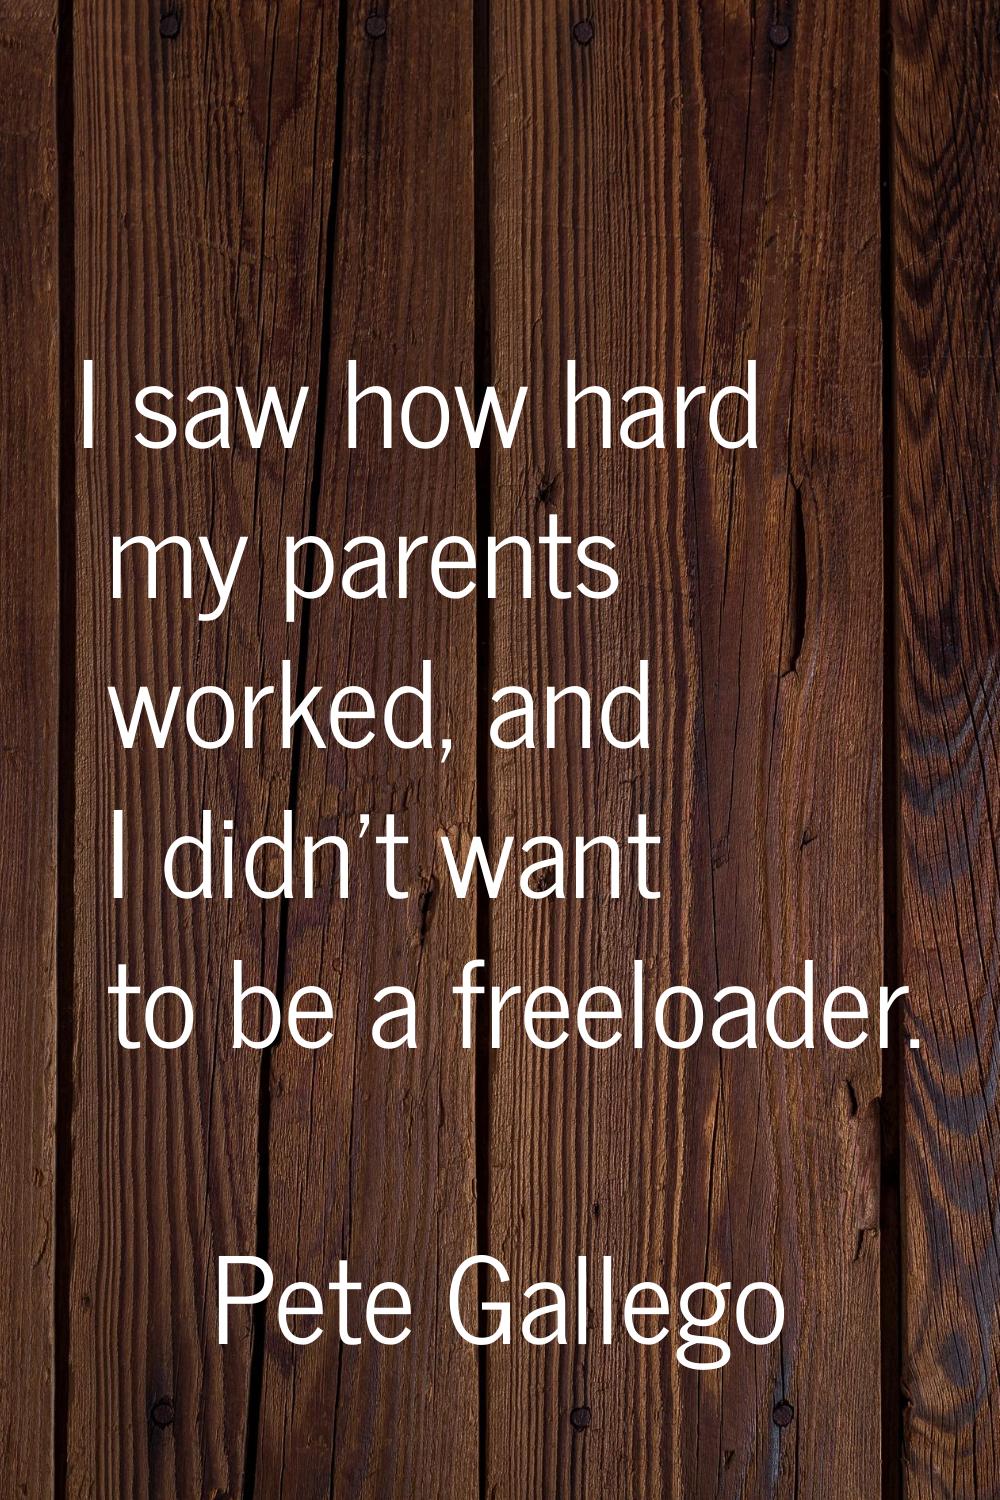 I saw how hard my parents worked, and I didn't want to be a freeloader.